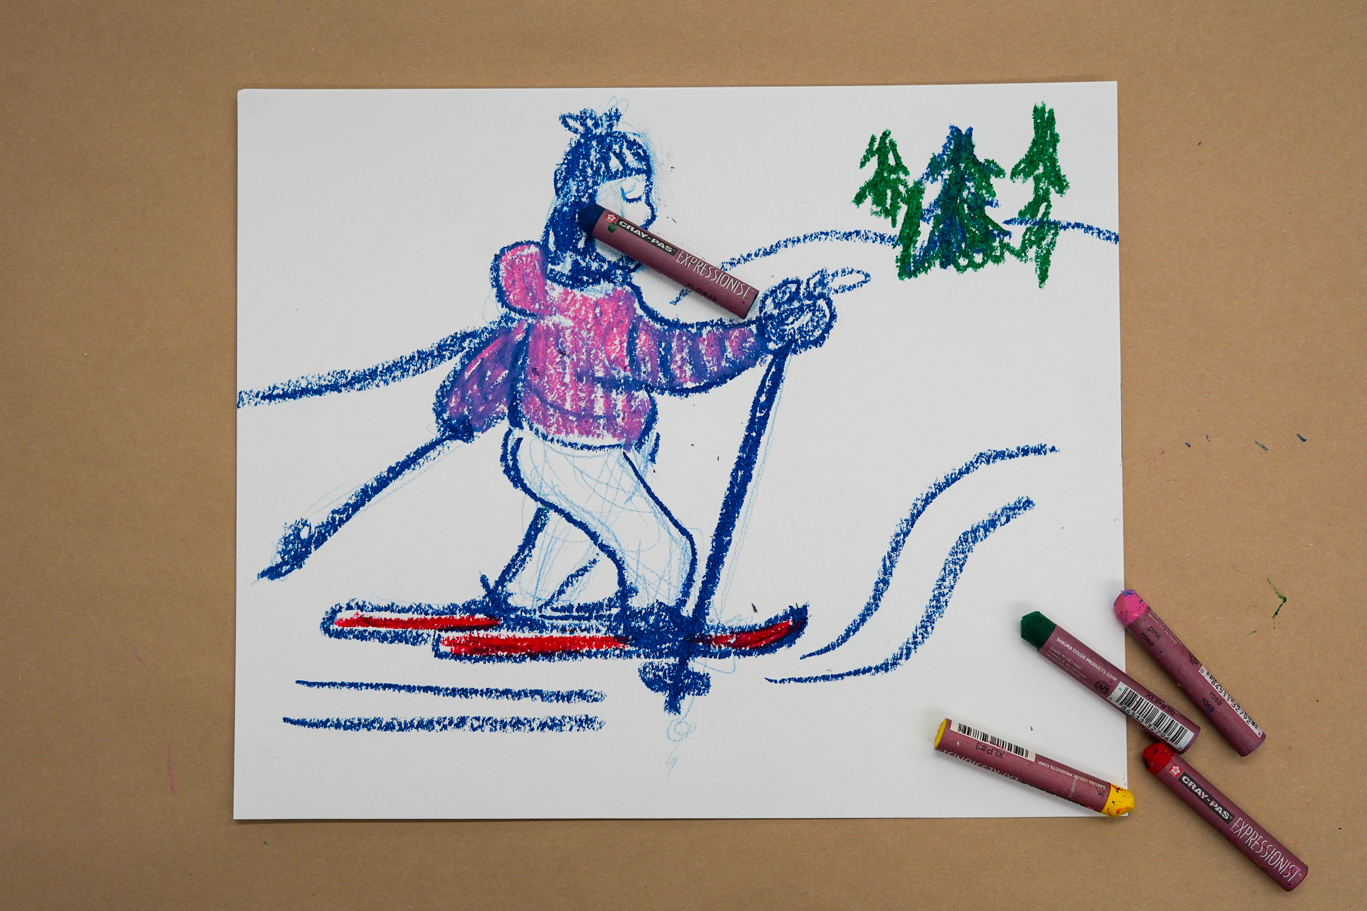 Photo of a piece of paper with a skier and trees drawn on it and pastels sitting on top of the lower right corner of the paper